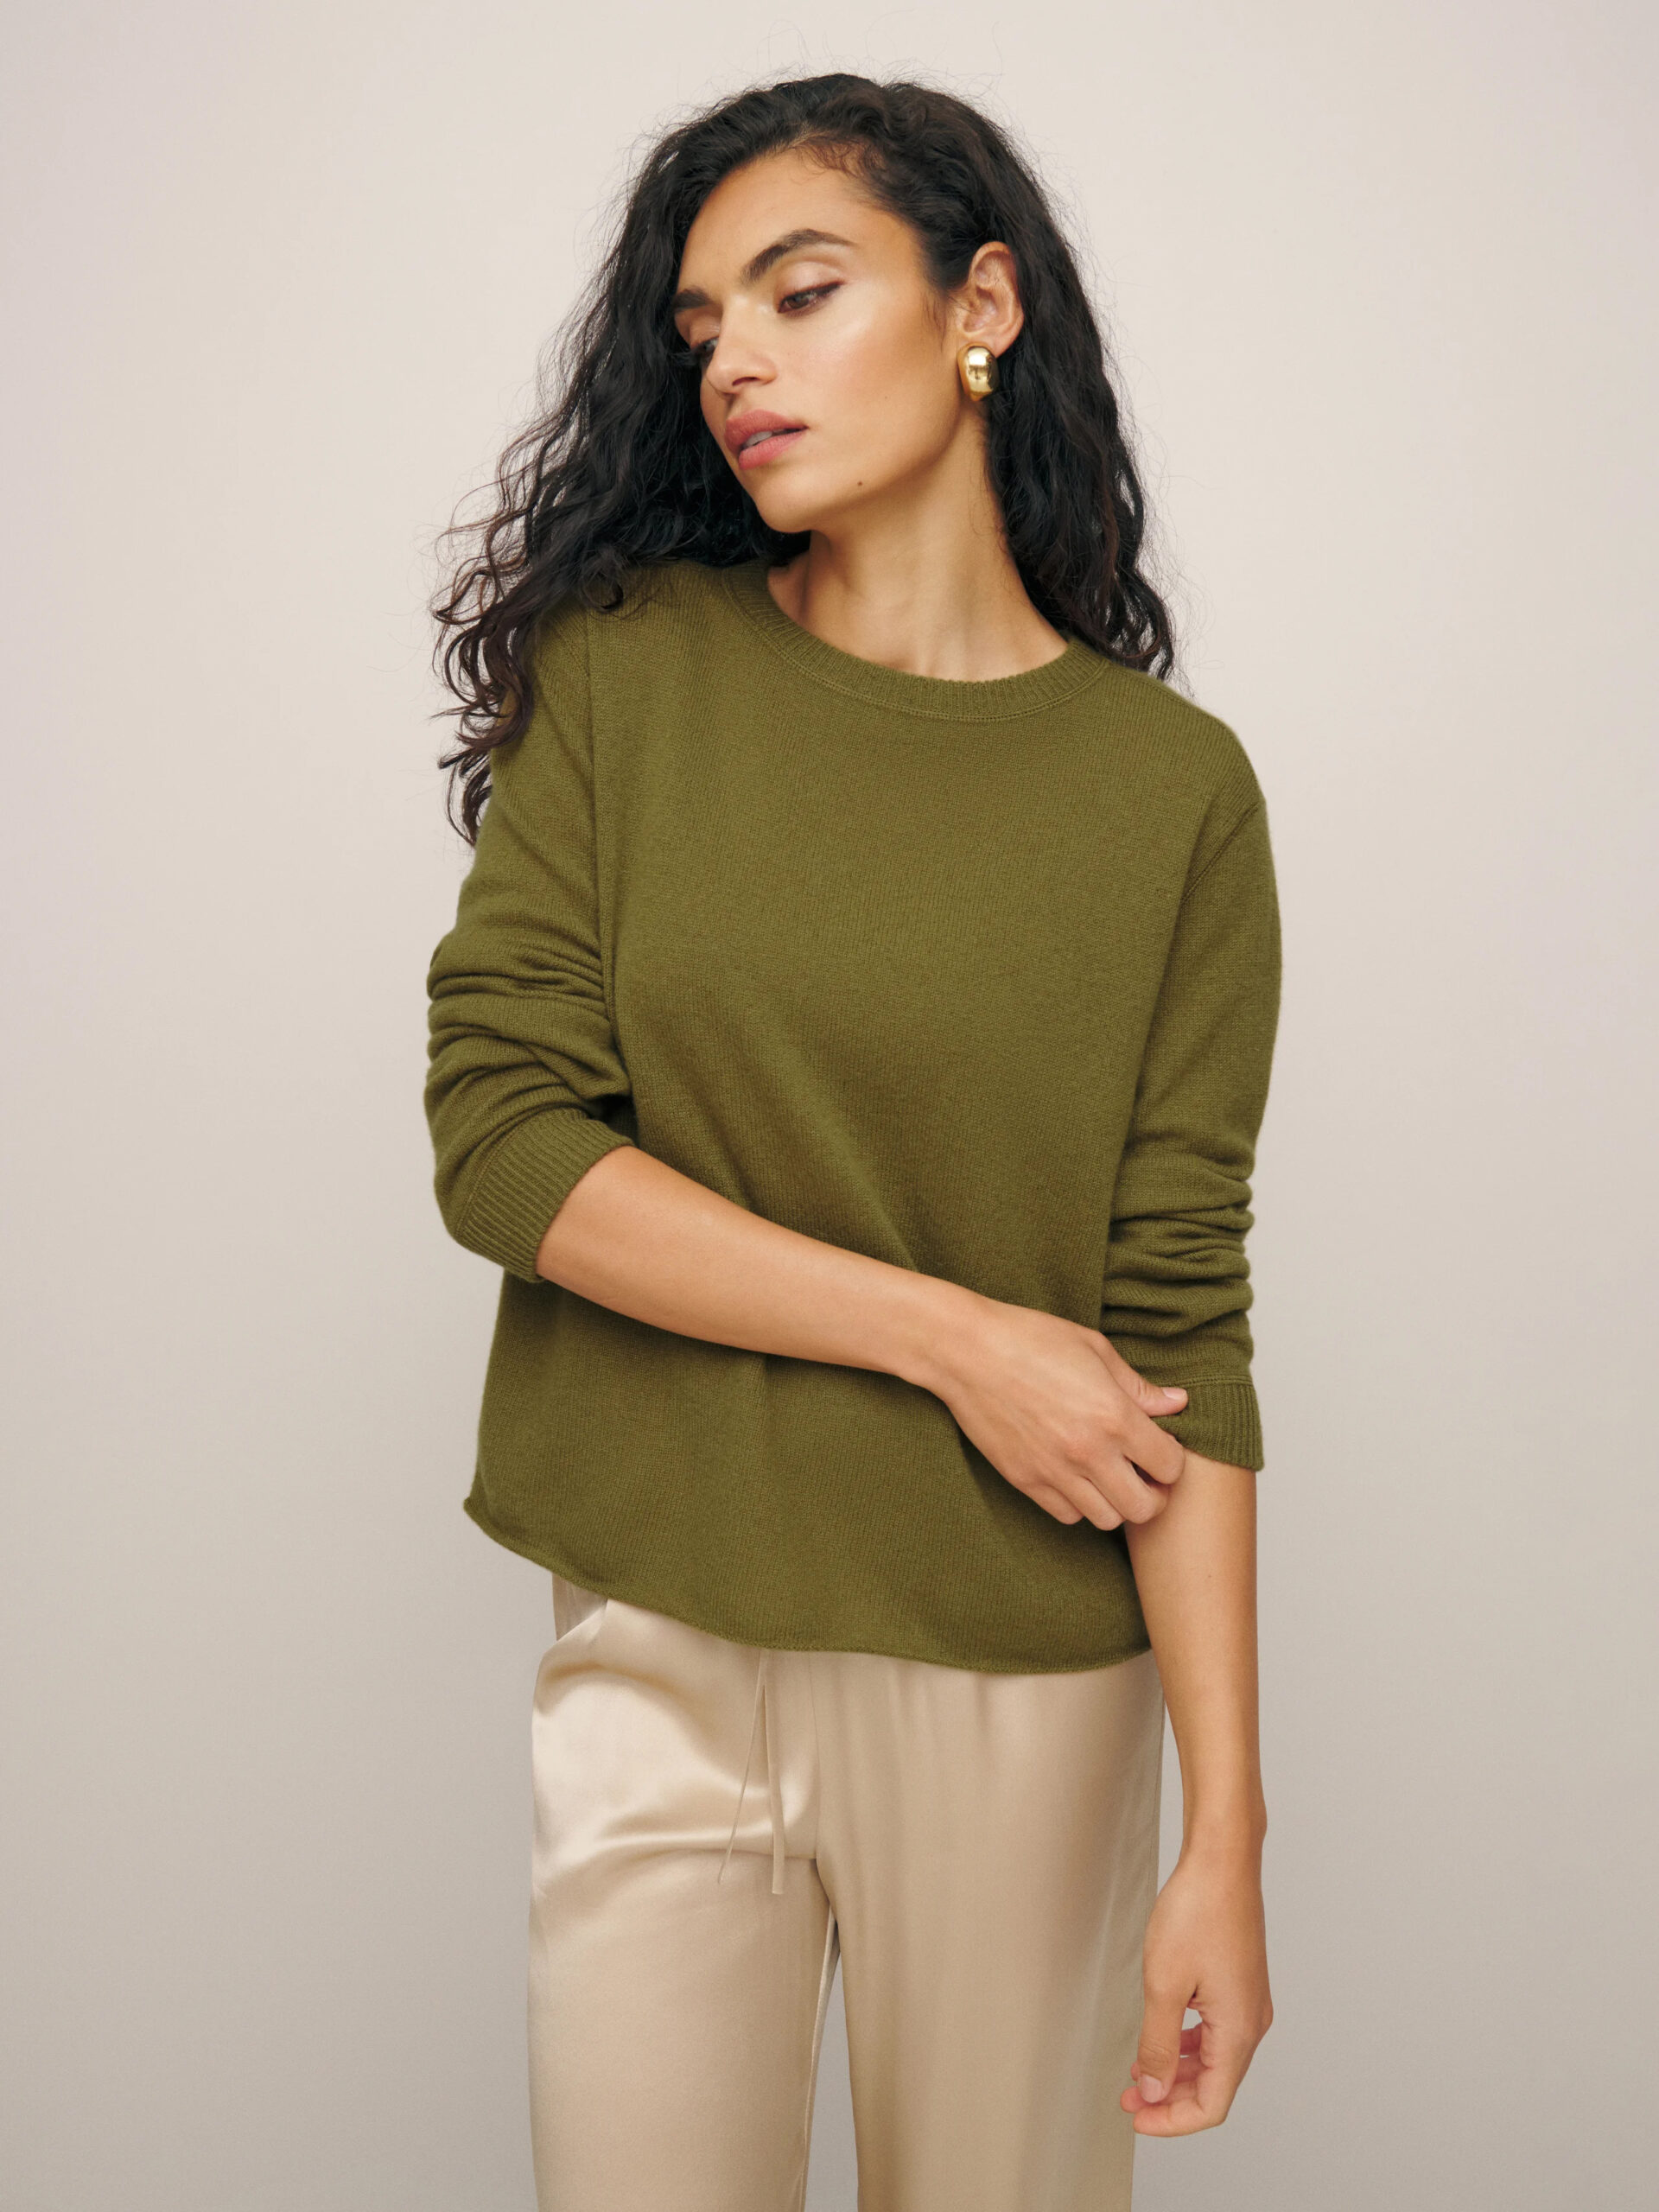 A woman in a green sweater and beige pants posing with her hand on her hip.